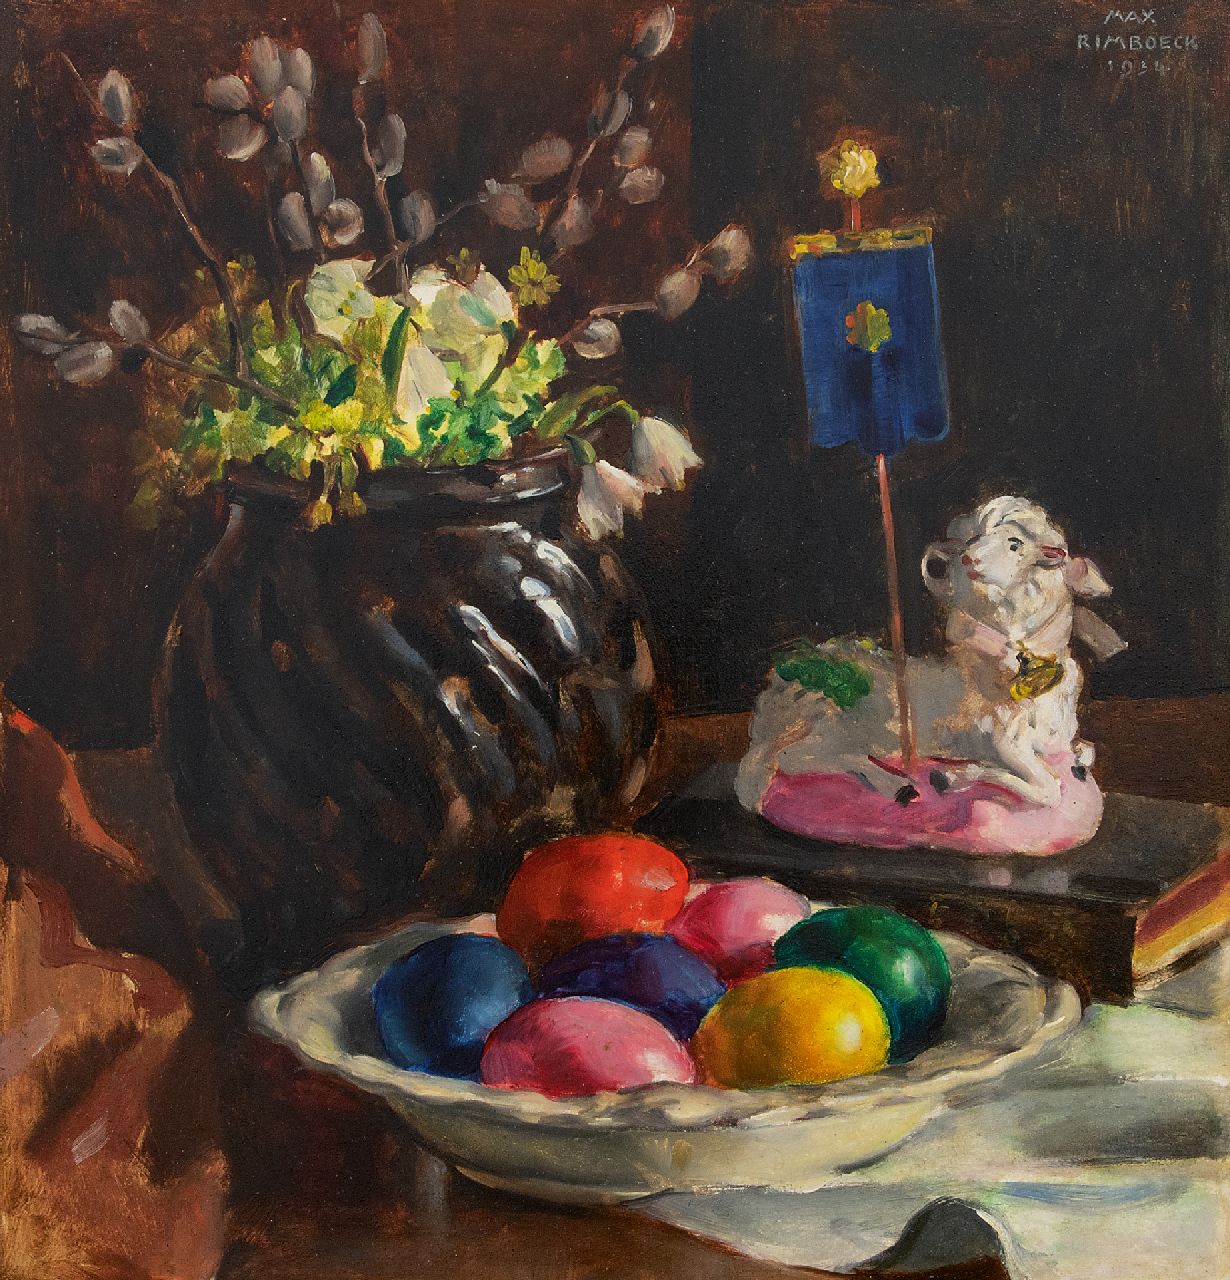 Max Rimböck | Easter still life, oil on panel, 38.3 x 37.0 cm, signed u.r. and dated 1934